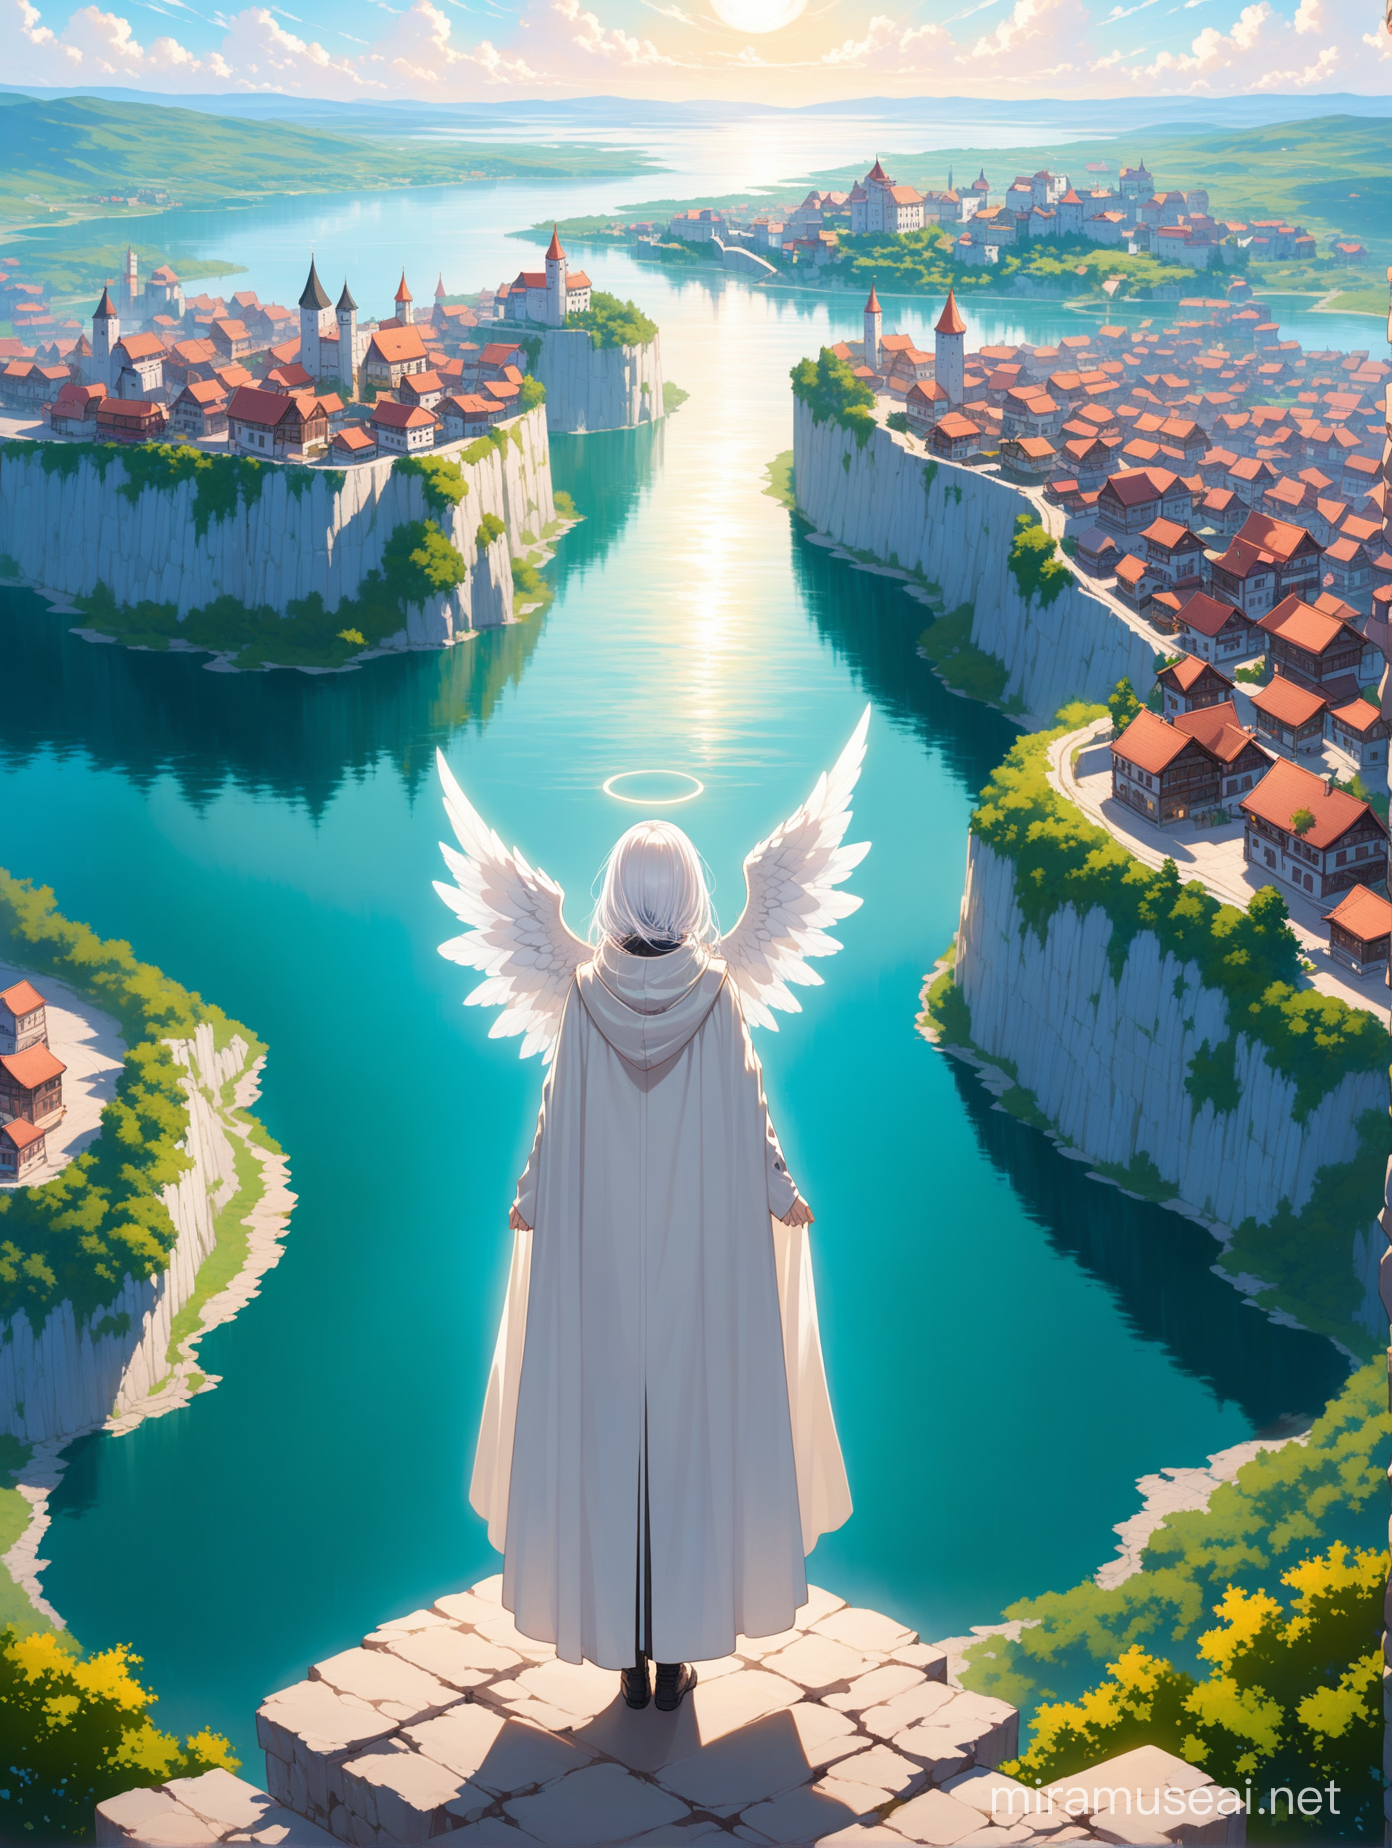 A woman who has white hair and is overlooking a small town on a cliff. This city is in the middle of a lake and has walls around them. She is facing the small town. She has a cloak on and angel wings